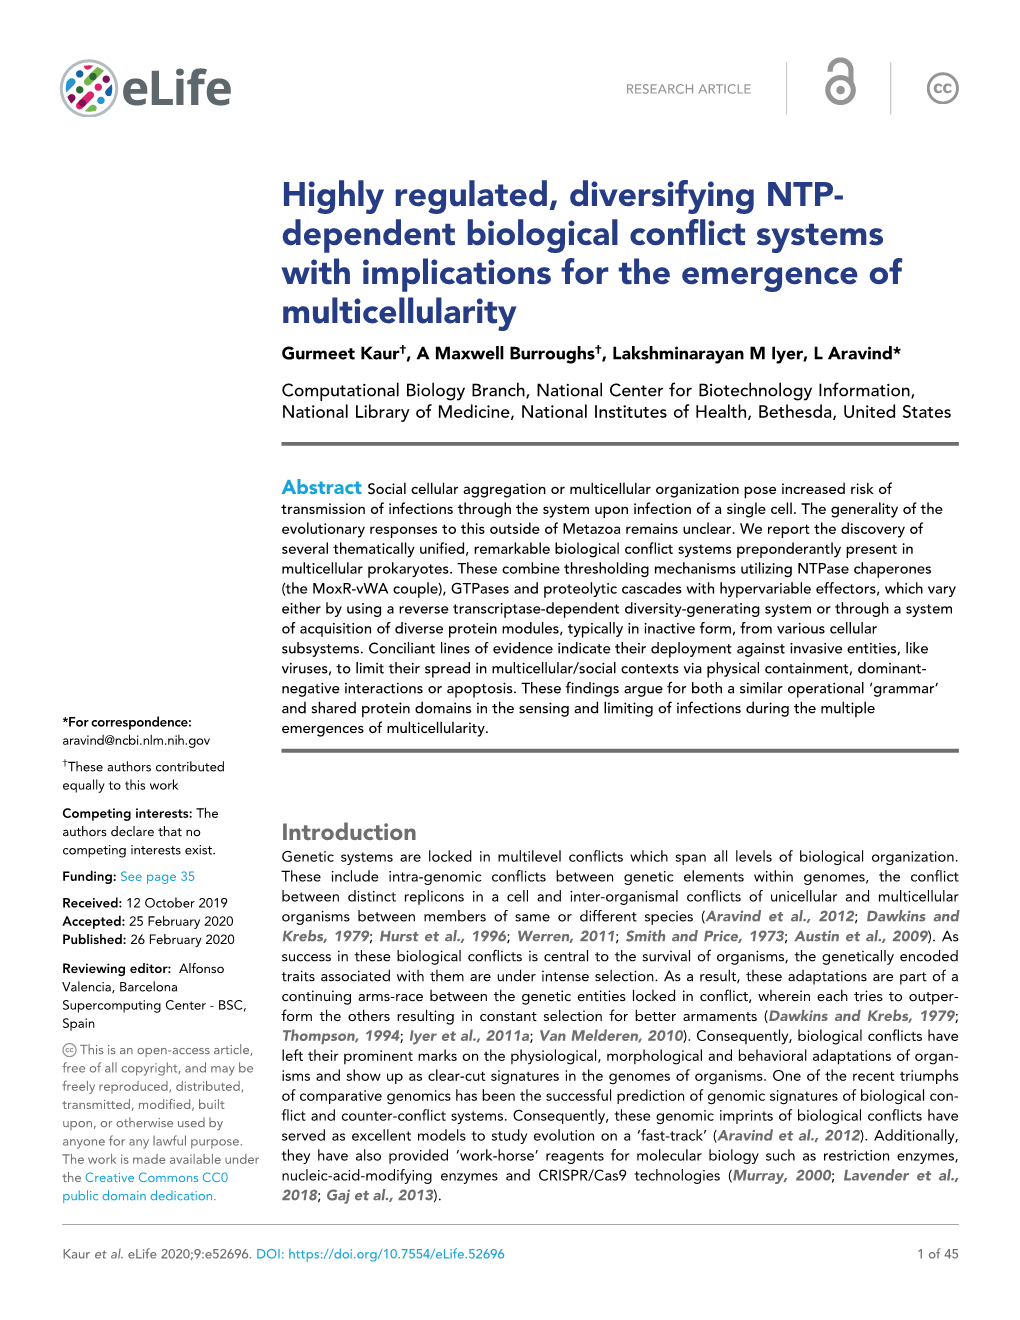 Highly Regulated, Diversifying NTP- Dependent Biological Conflict